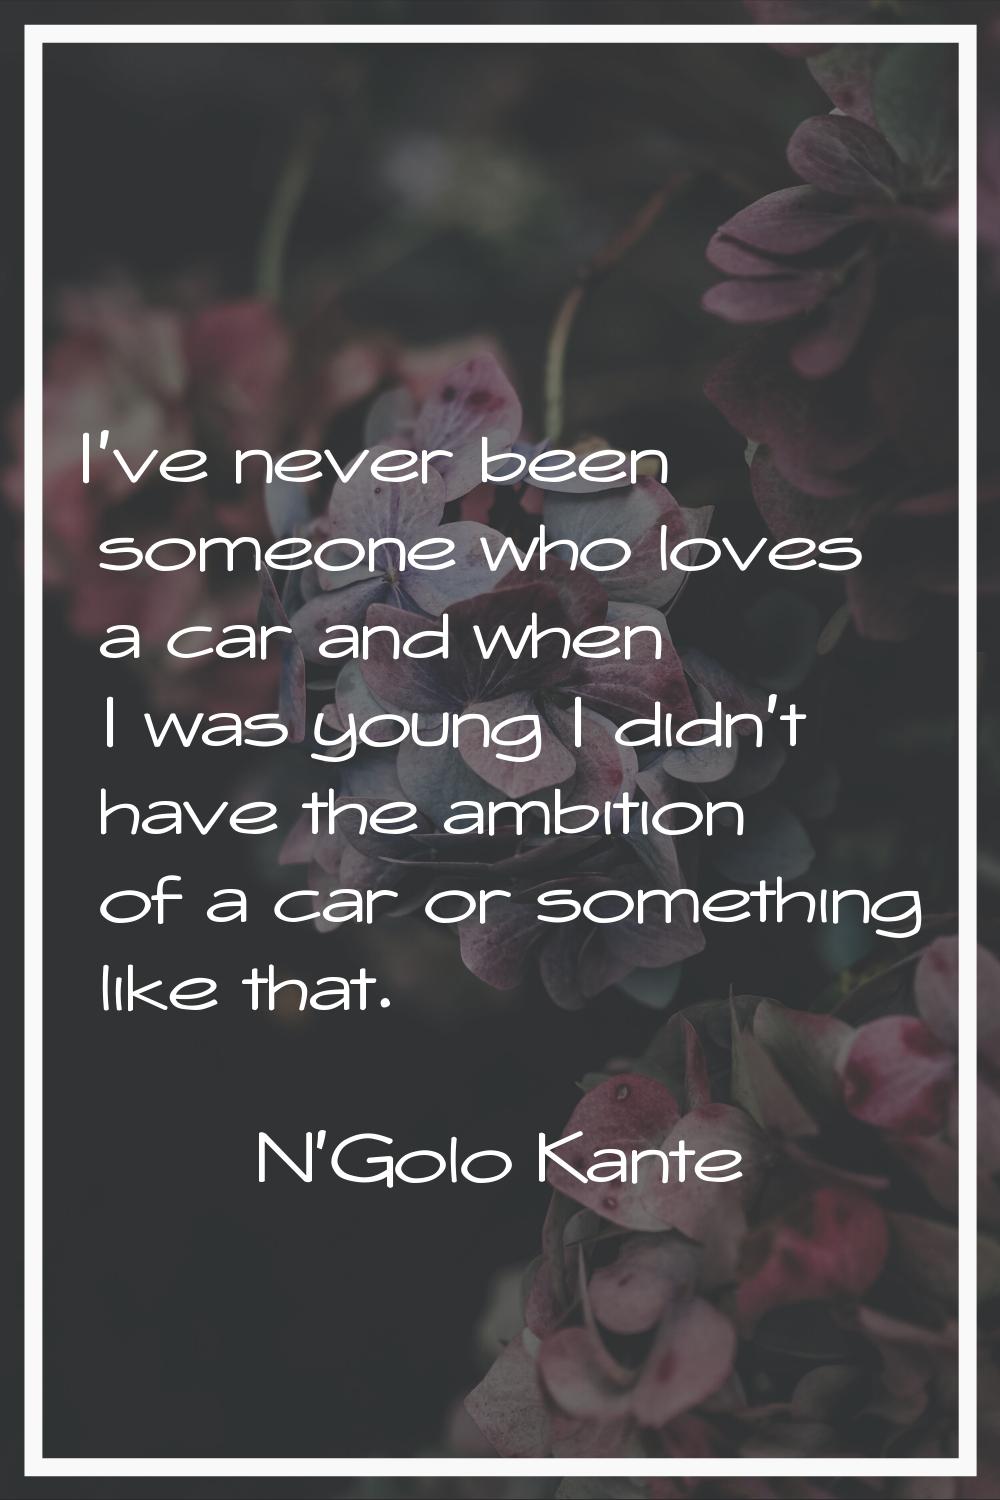 I've never been someone who loves a car and when I was young I didn't have the ambition of a car or